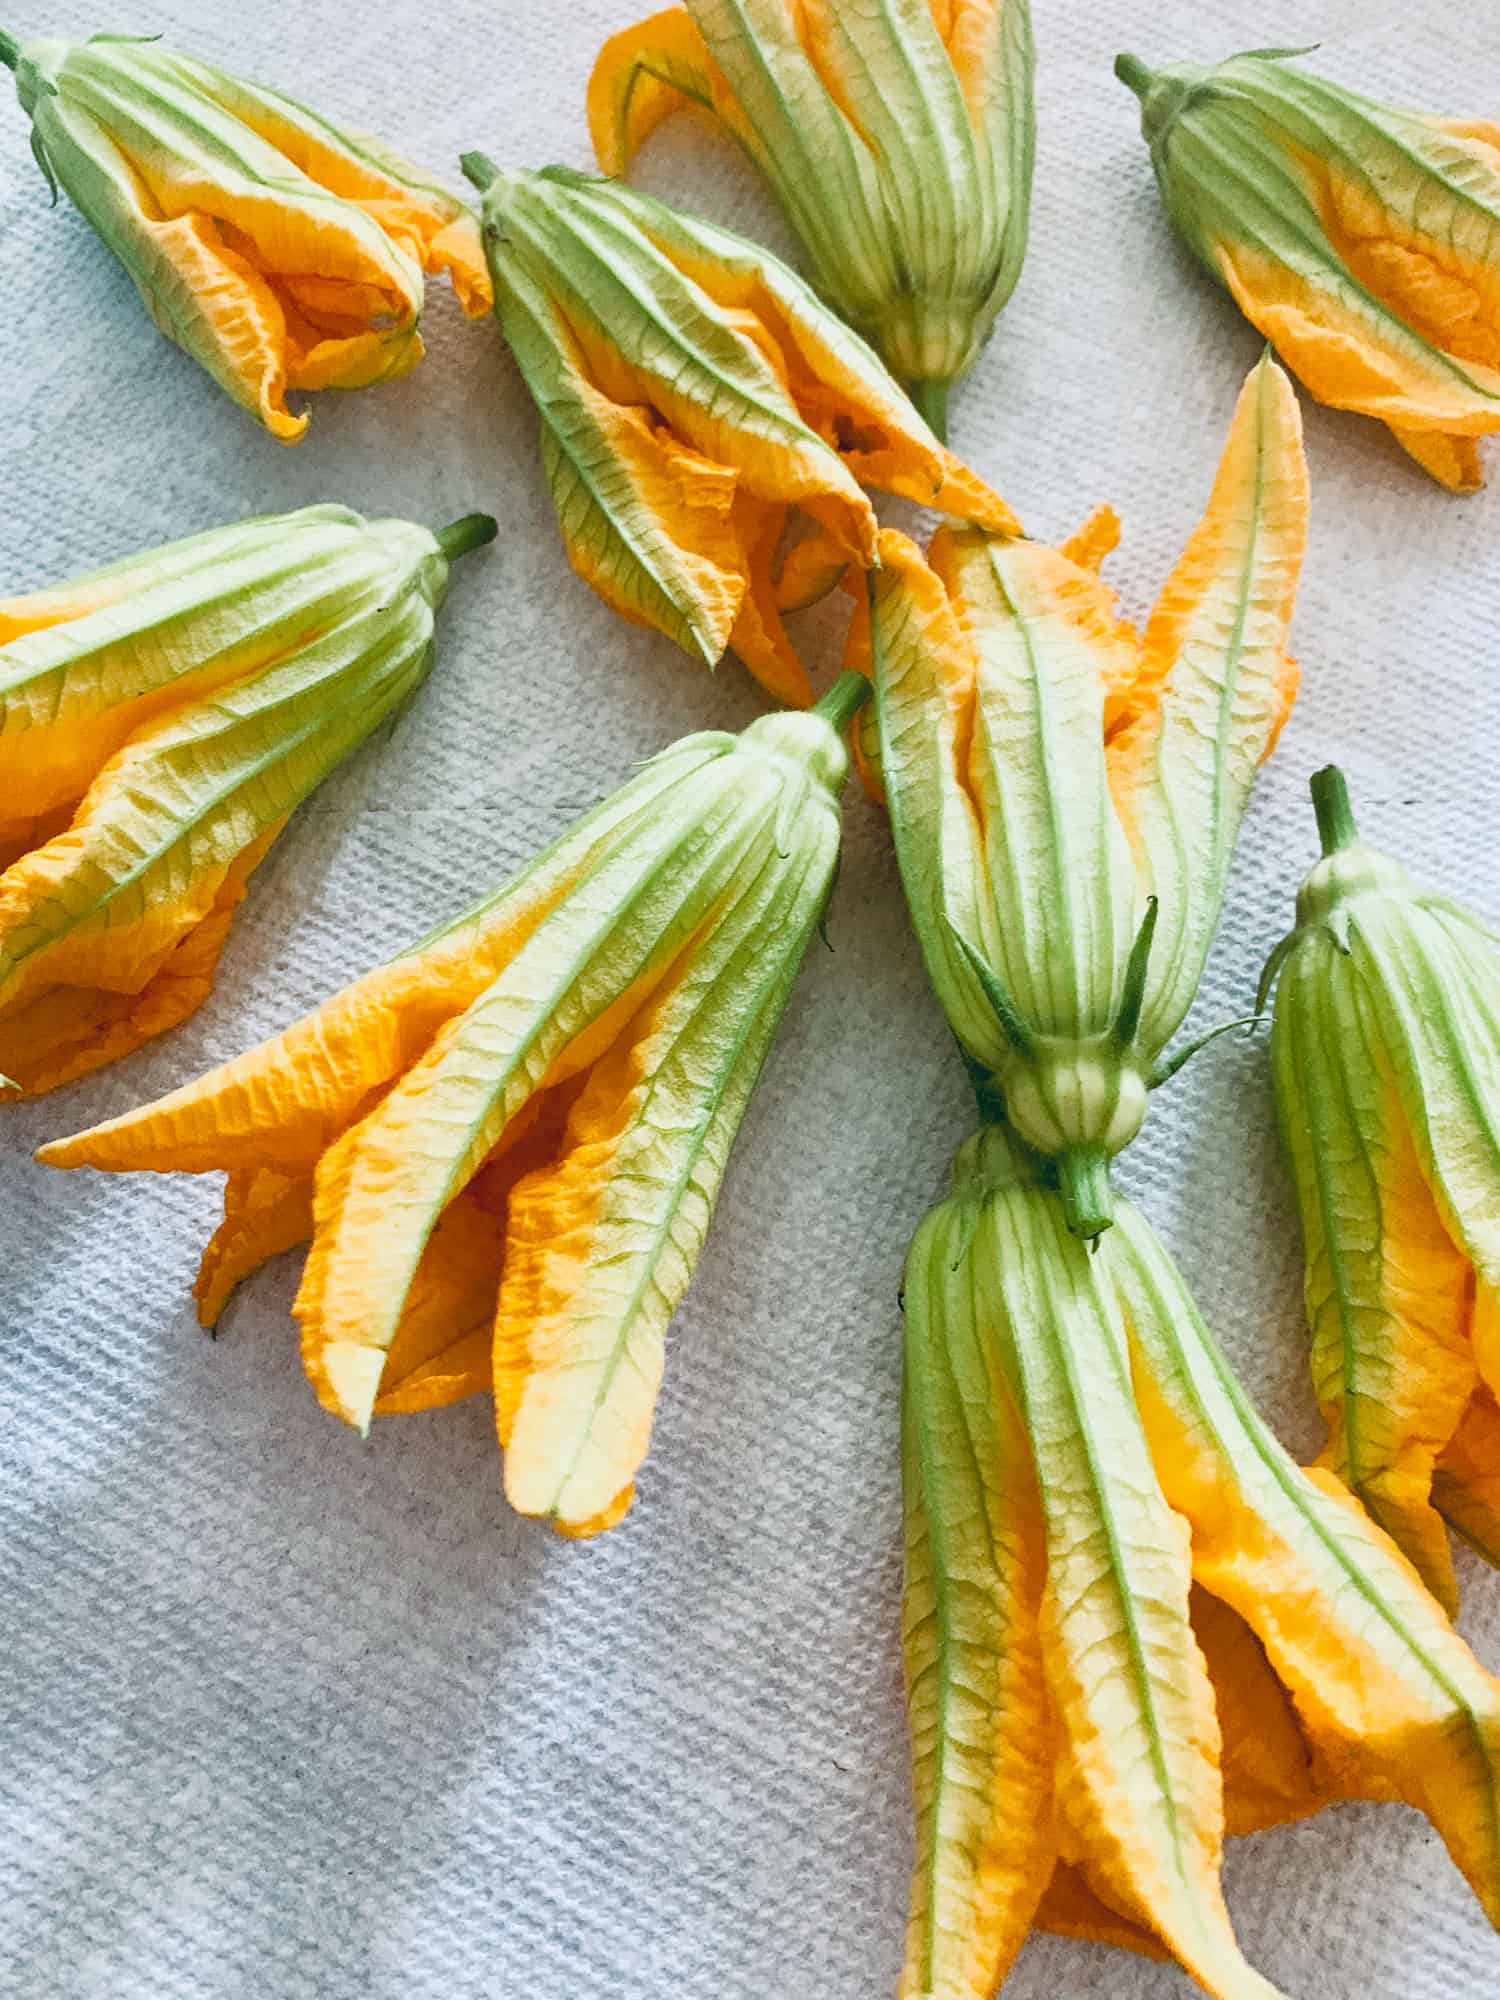 Squash blossoms freshly washed on a paper towel